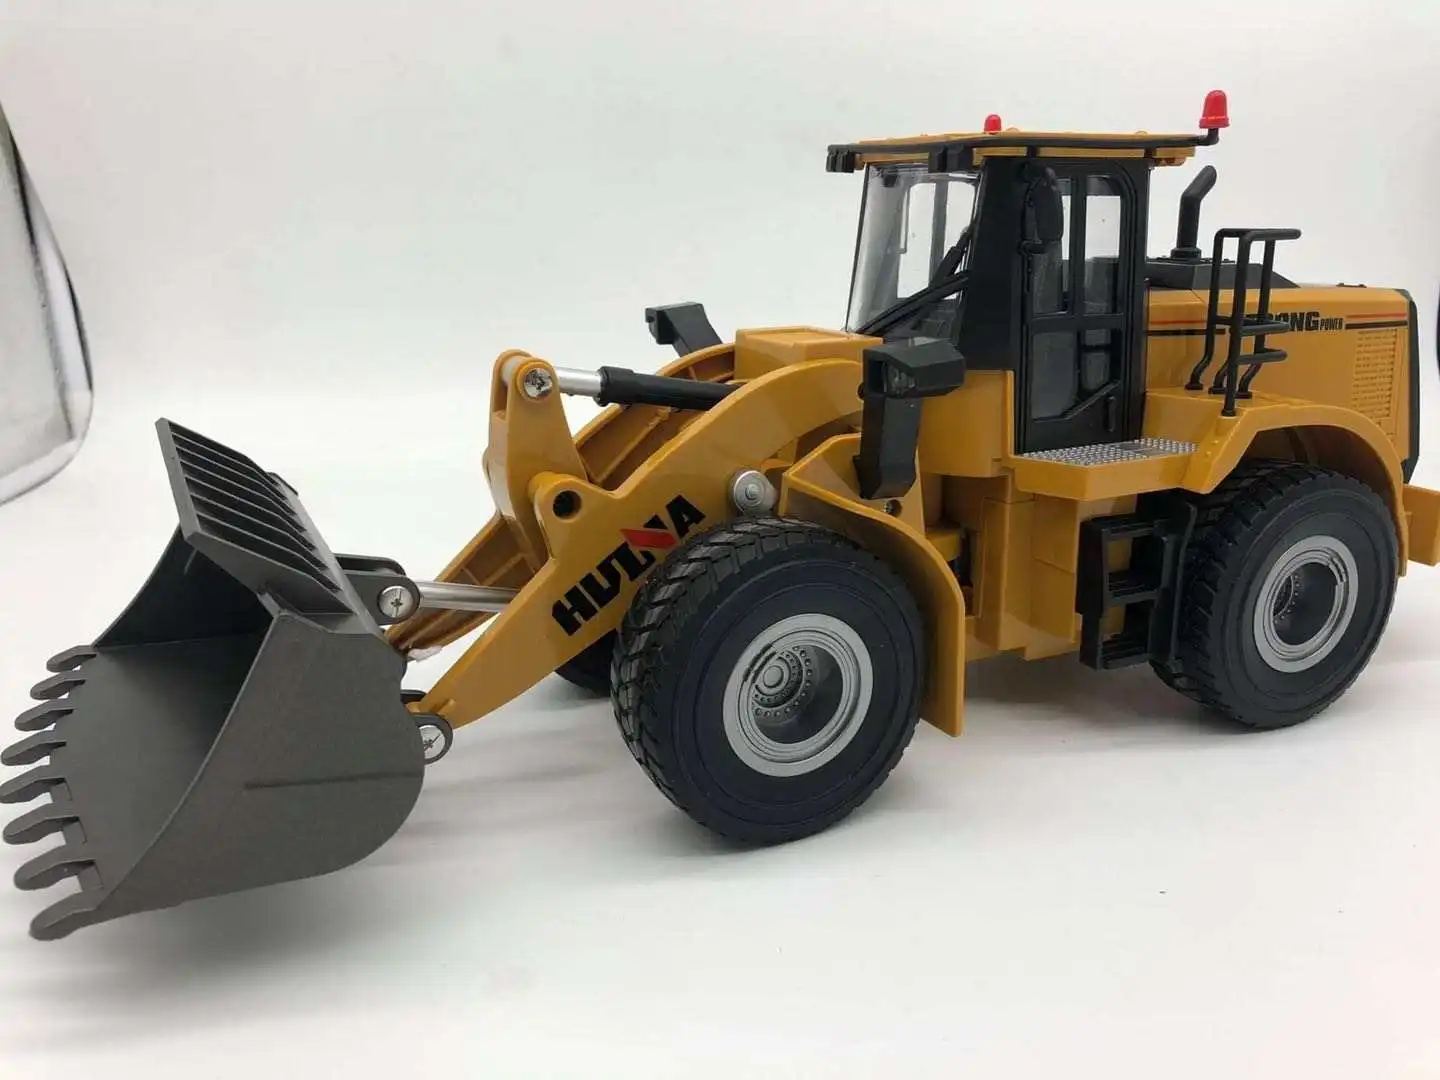 Latest 2020 December version 1/24 scale Huina 1567 RC Wheel Loader 7.4V 600mAh 9 channels for over 8 years old US/CANADA/AU/EU enlarge